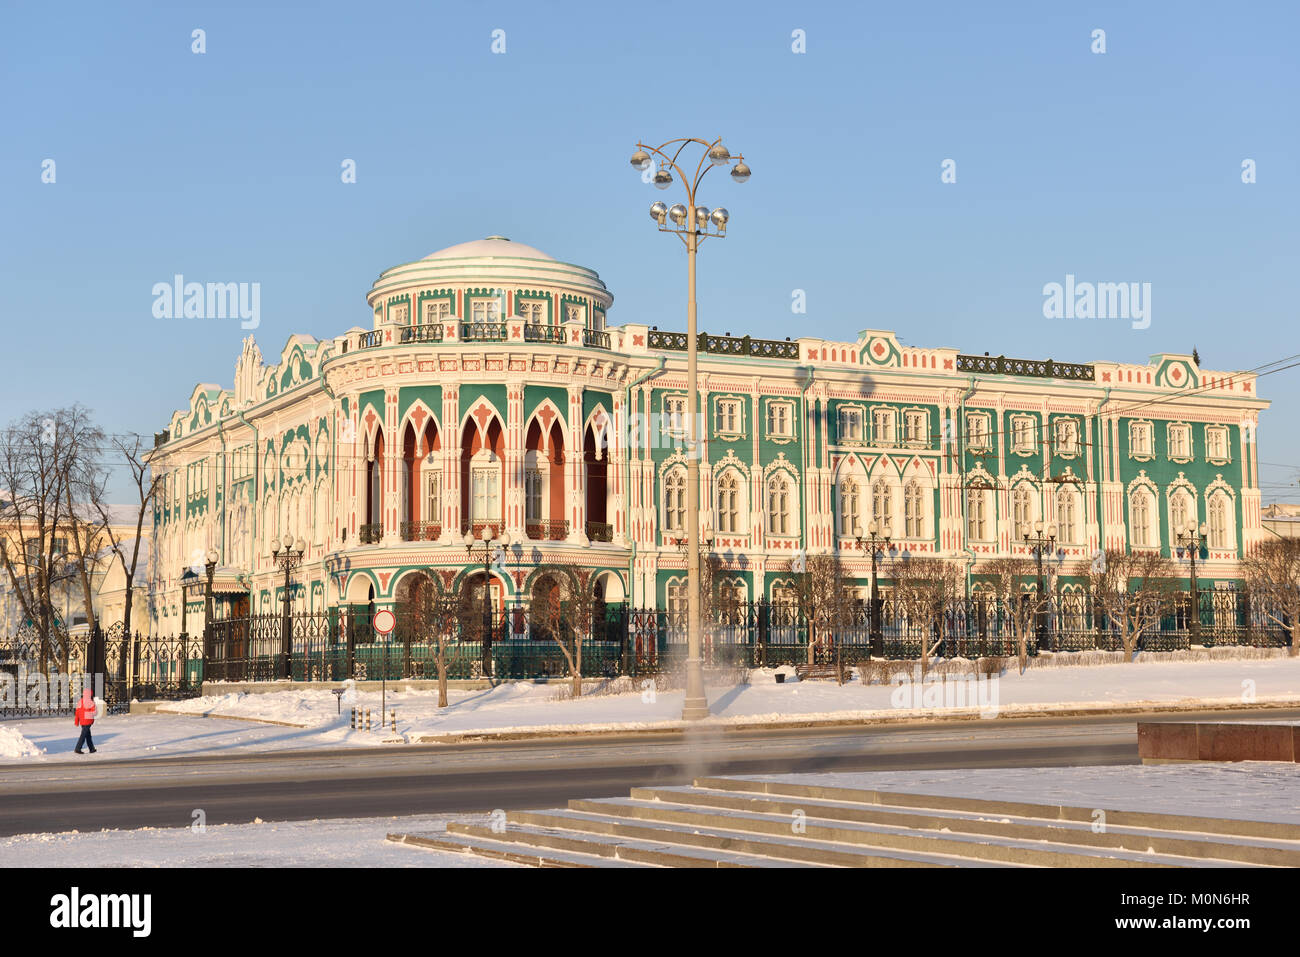 Yekaterinburg, Russia - January 2, 2015: Man near the House of N. I. Sevastianov in a winter day. Built in the first quarter of XIX century Stock Photo